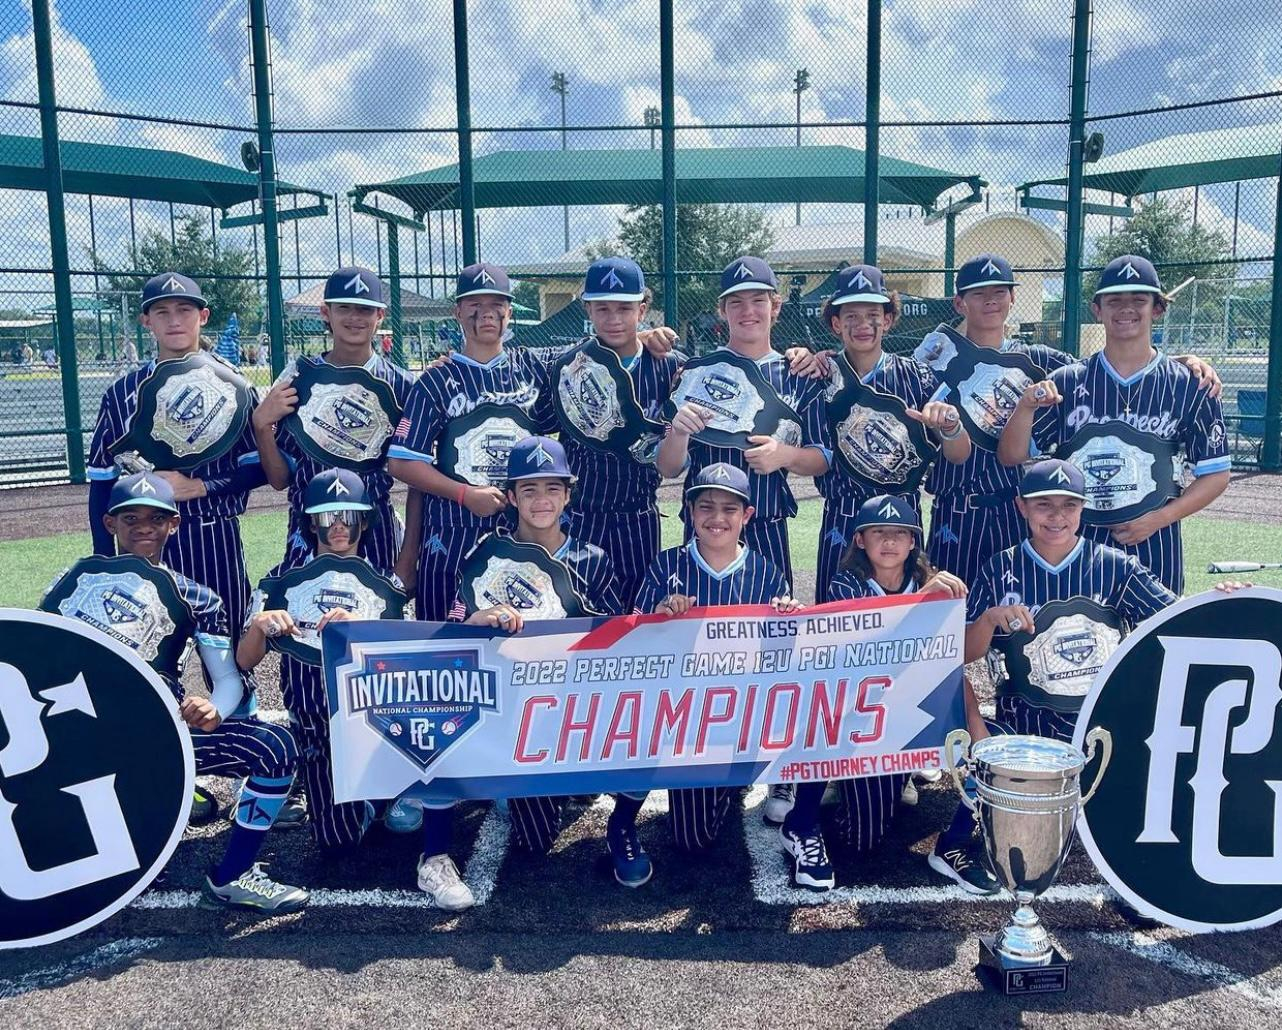 ZT Prospects National Wins Gold at 11U Futures Invitational